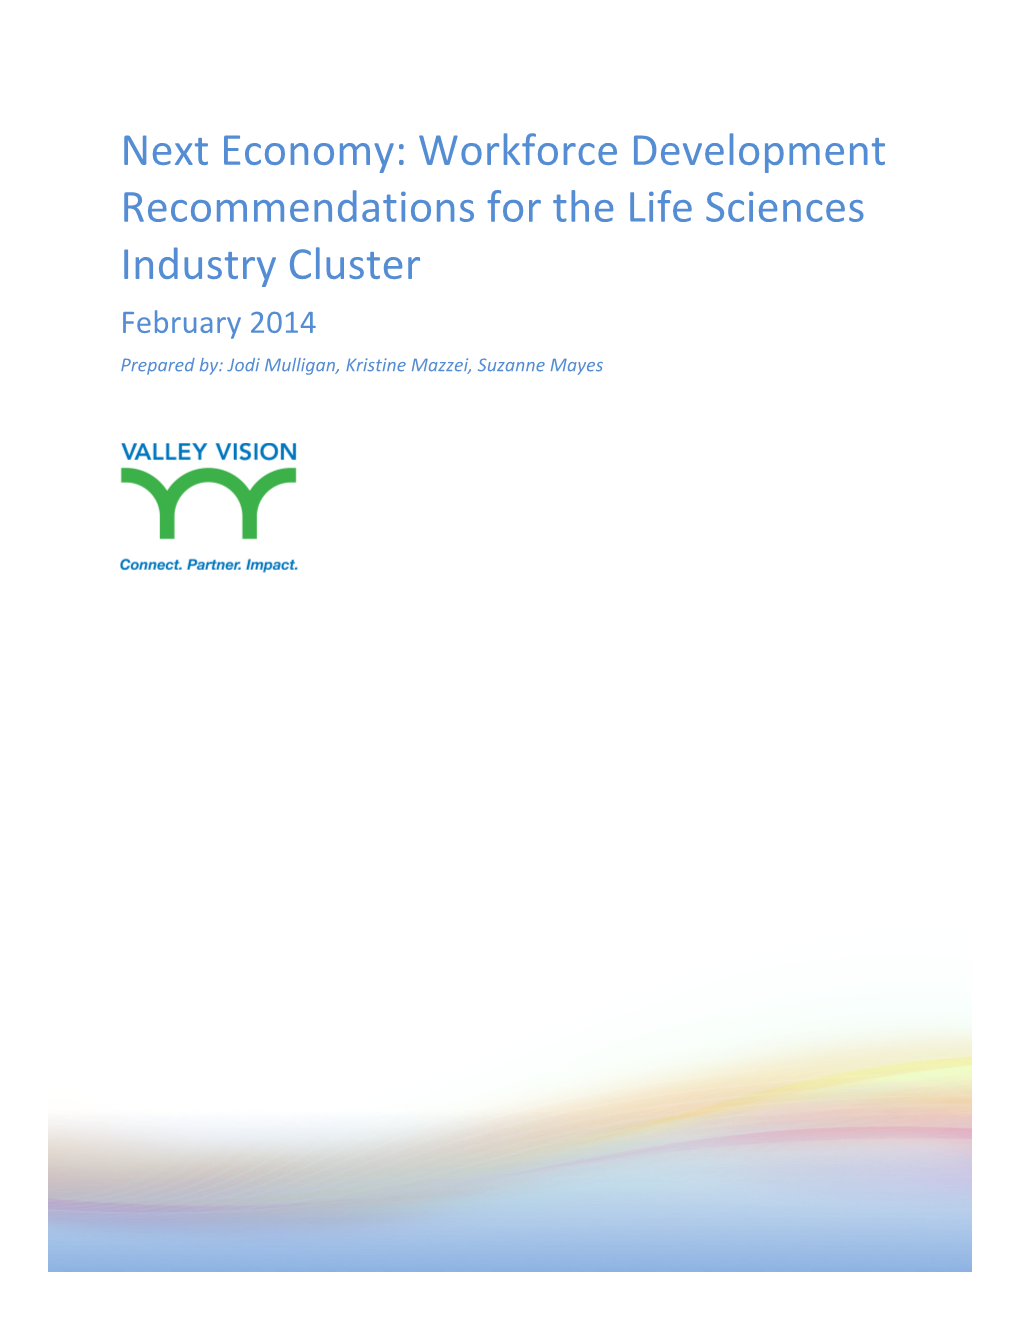 Workforce Development Recommendations for the Life Sciences Industry Cluster February 2014 Prepared By: Jodi Mulligan, Kristine Mazzei, Suzanne Mayes